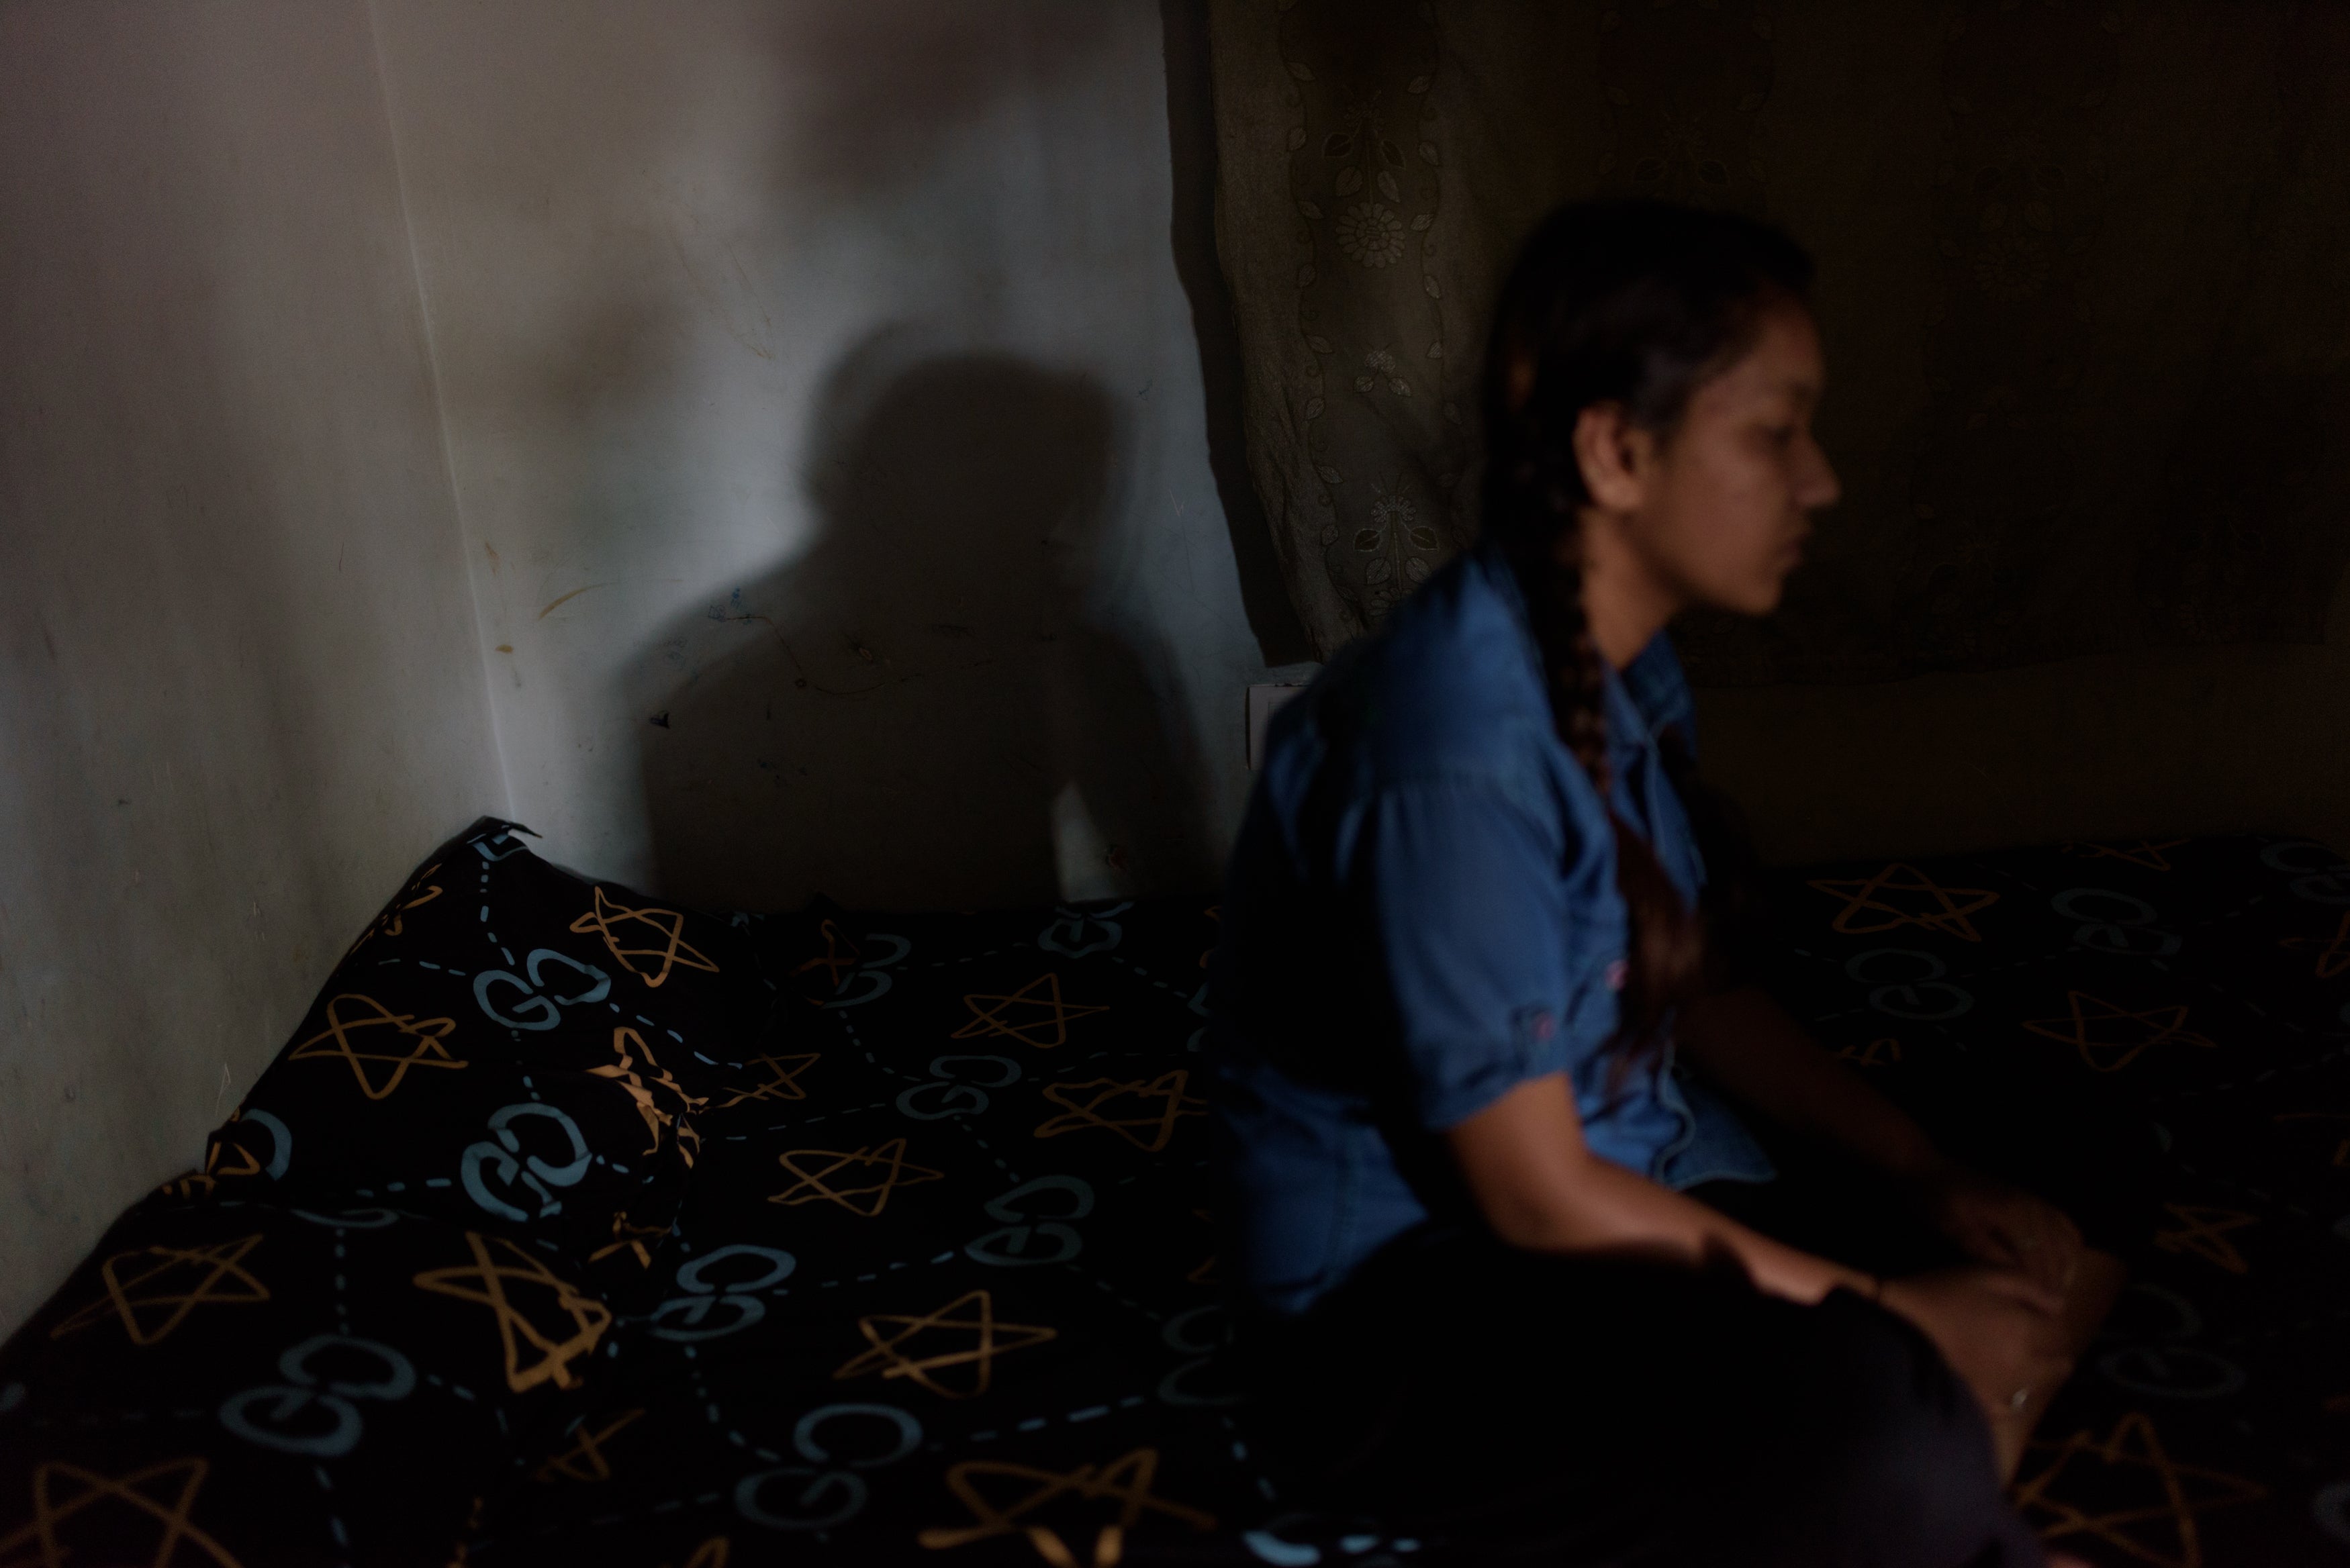 Divya, a 17-year-old woman from Bhopal, was raped twice by a man who stalked and harassed her